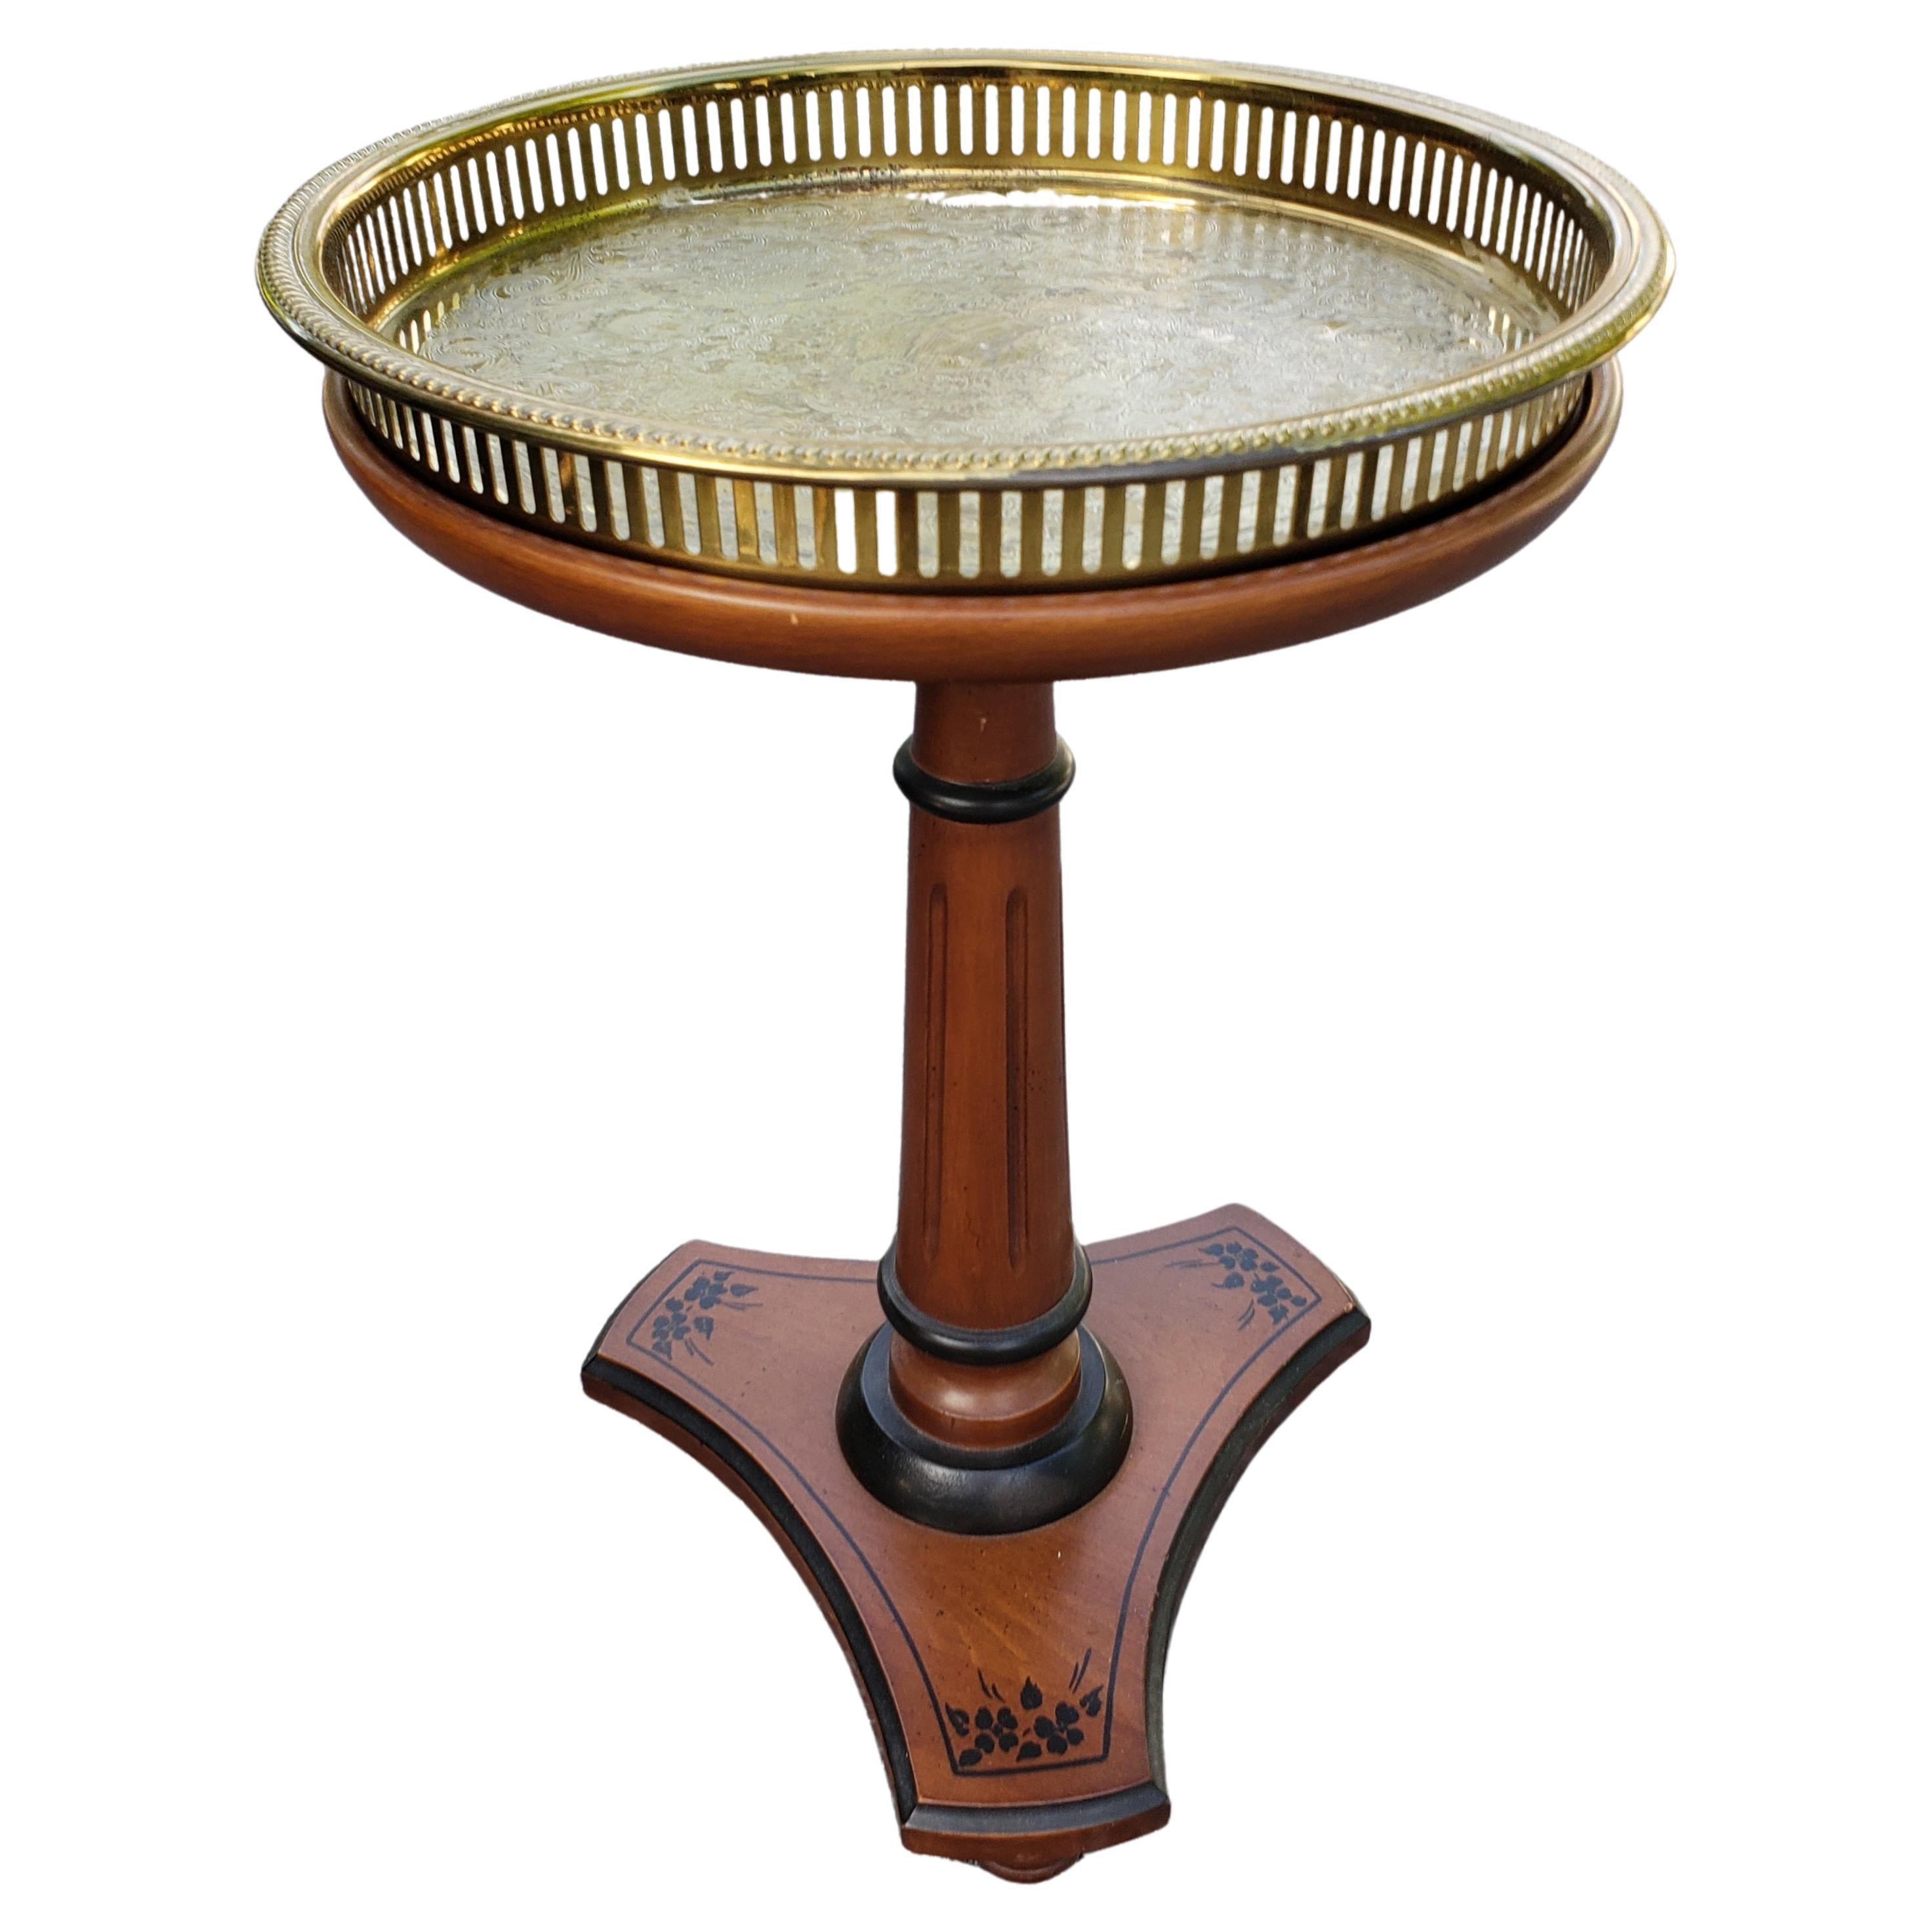 Late 20th C. Pedestal Walnut Candle Stand w/ Galleried Etched Brass Tray Insert